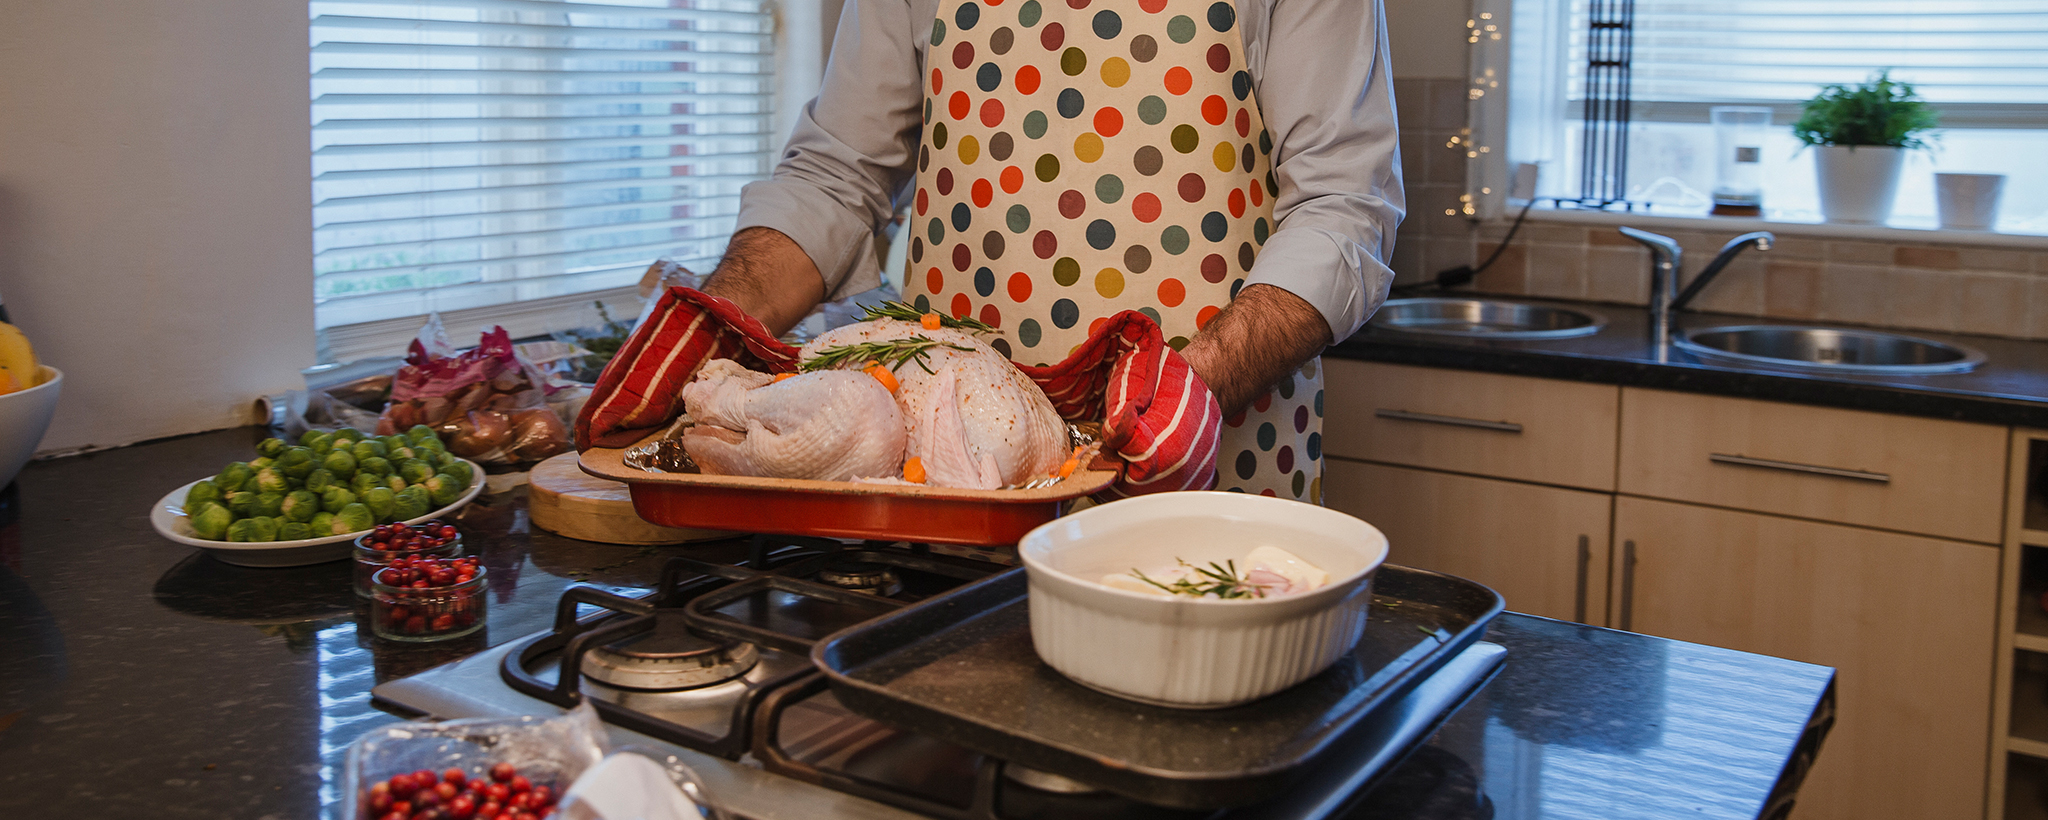 a man prepares a holiday turkey to put in the oven